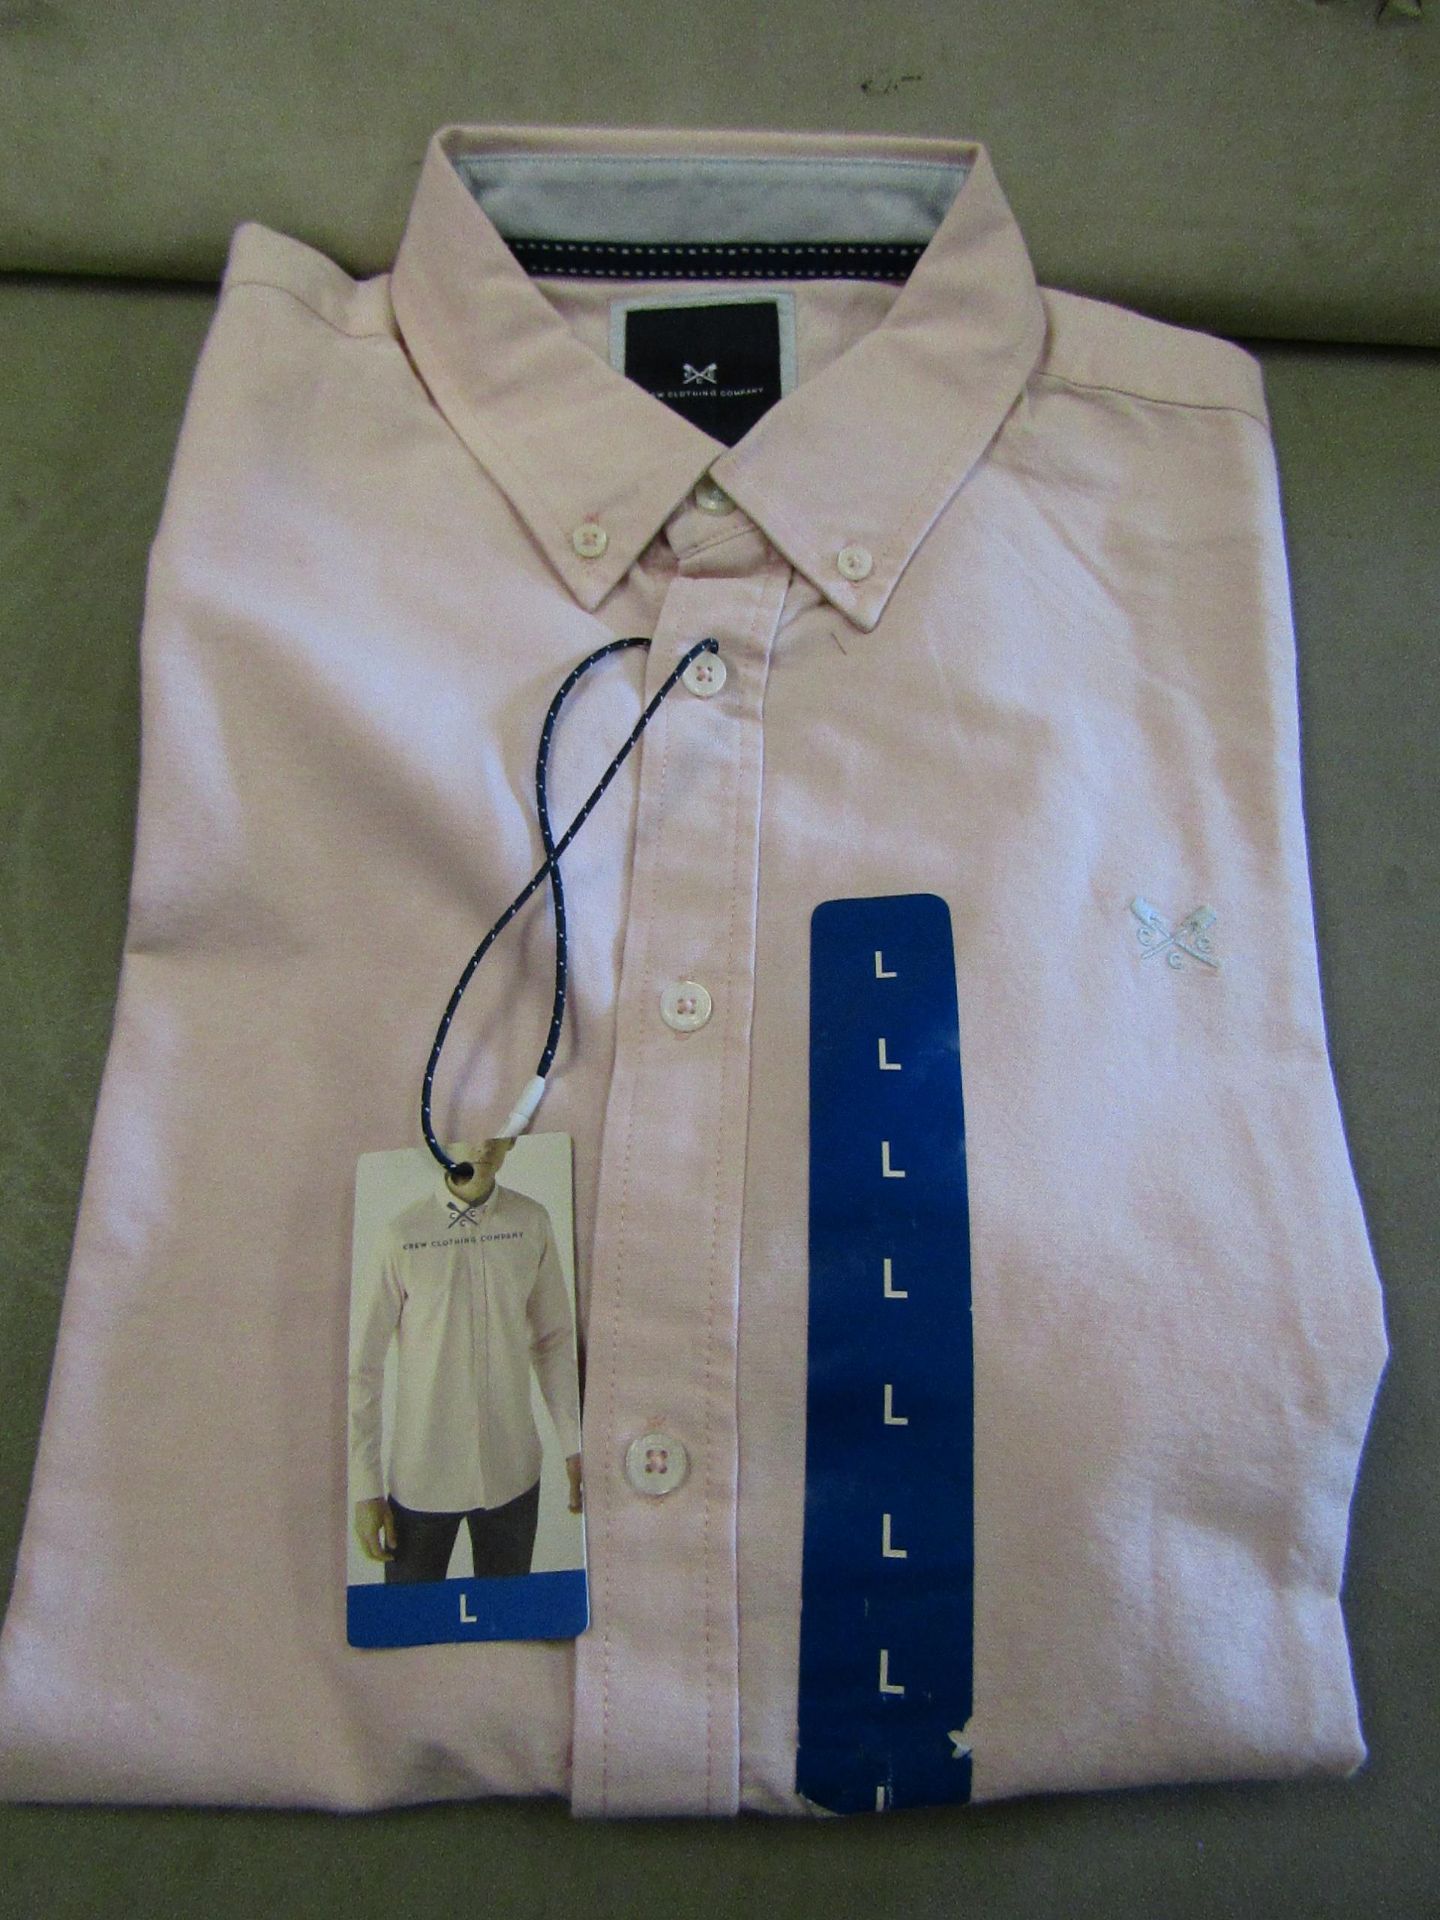 Crew Clothing Company, Mens Oxford Slim Fit Shirt Silver/Pink Size L New With Tags